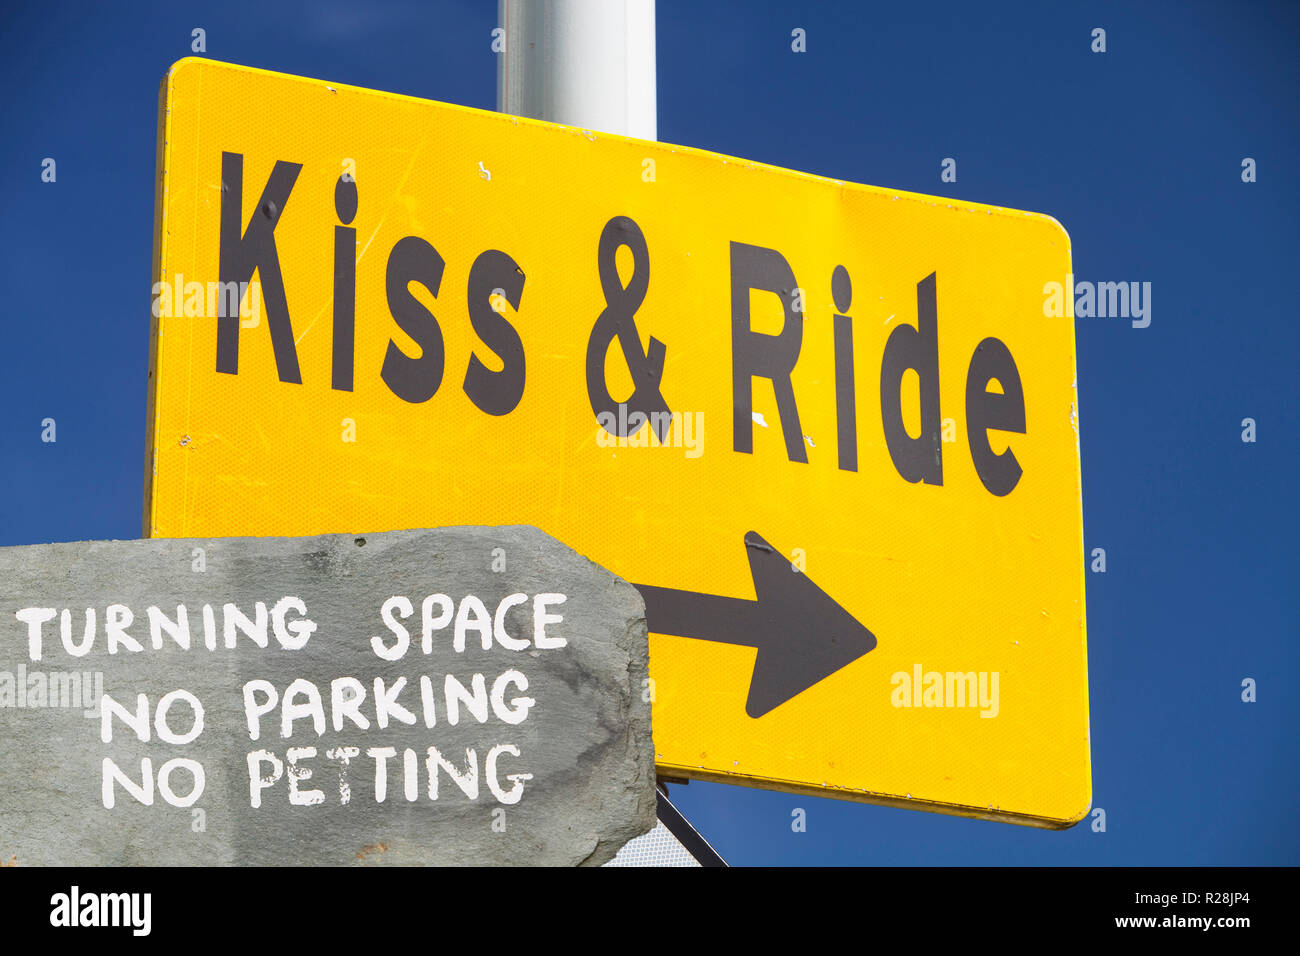 A Kiss and ride sign in Zaanstadt, Netherlands. Stock Photo